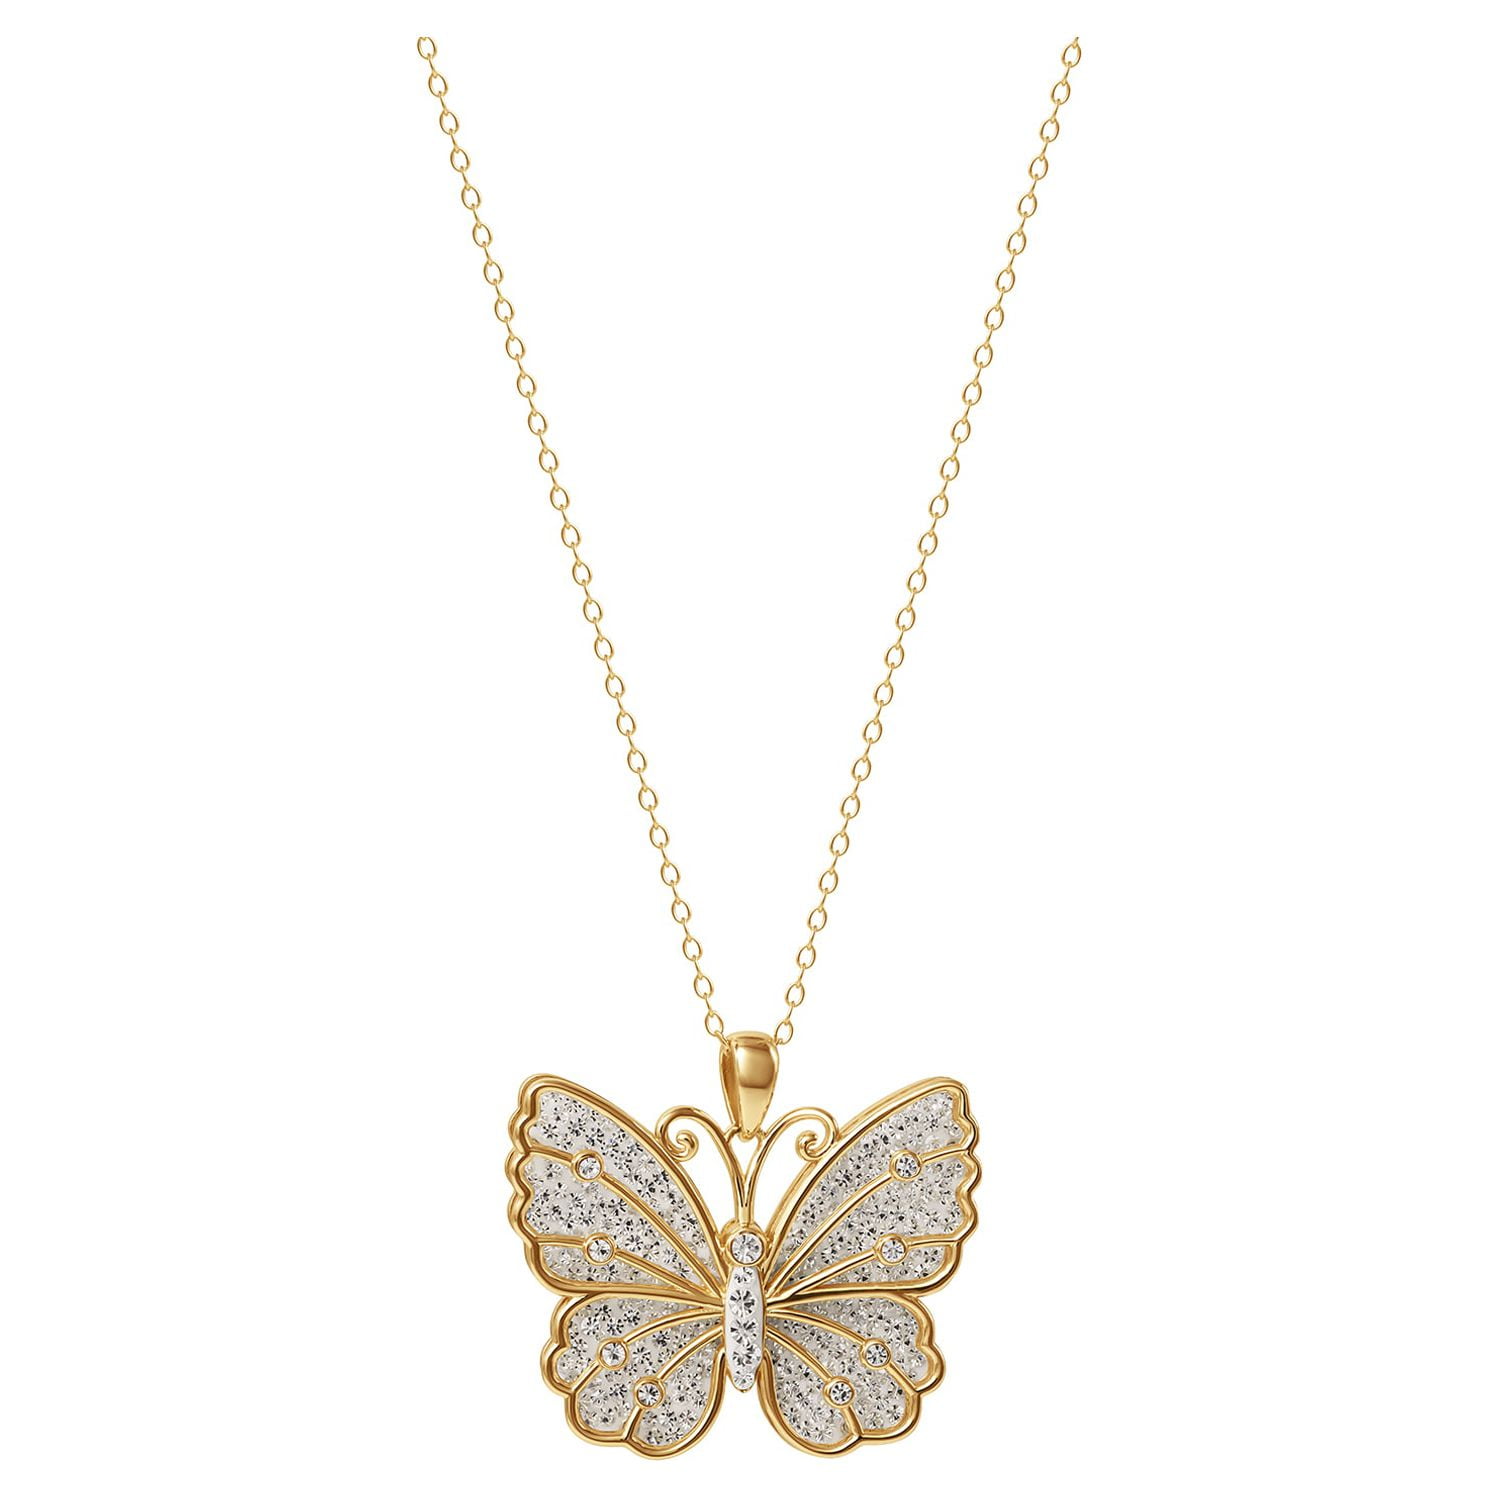 Buy Obtheleg Cute Butterfly BFF Necklaces for 2, Enamel Butterfly  Friendship Necklace for Teen Girls Women Best Friend Birthday Gift at  Amazon.in